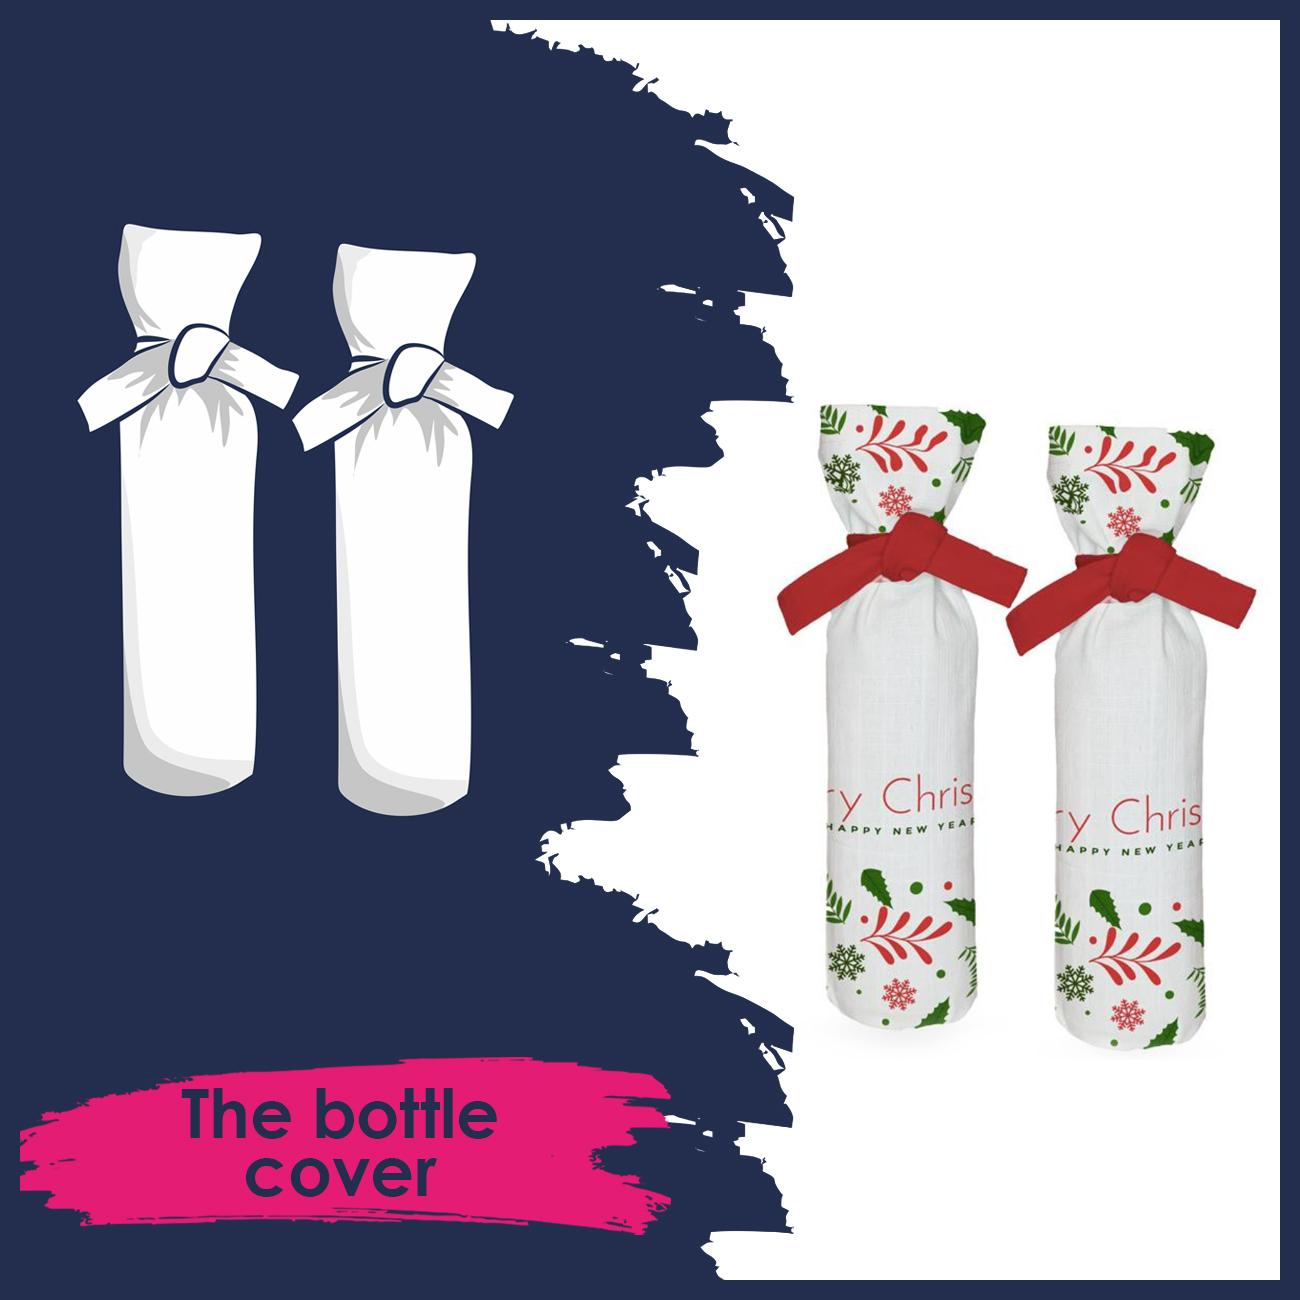 The bottle cover